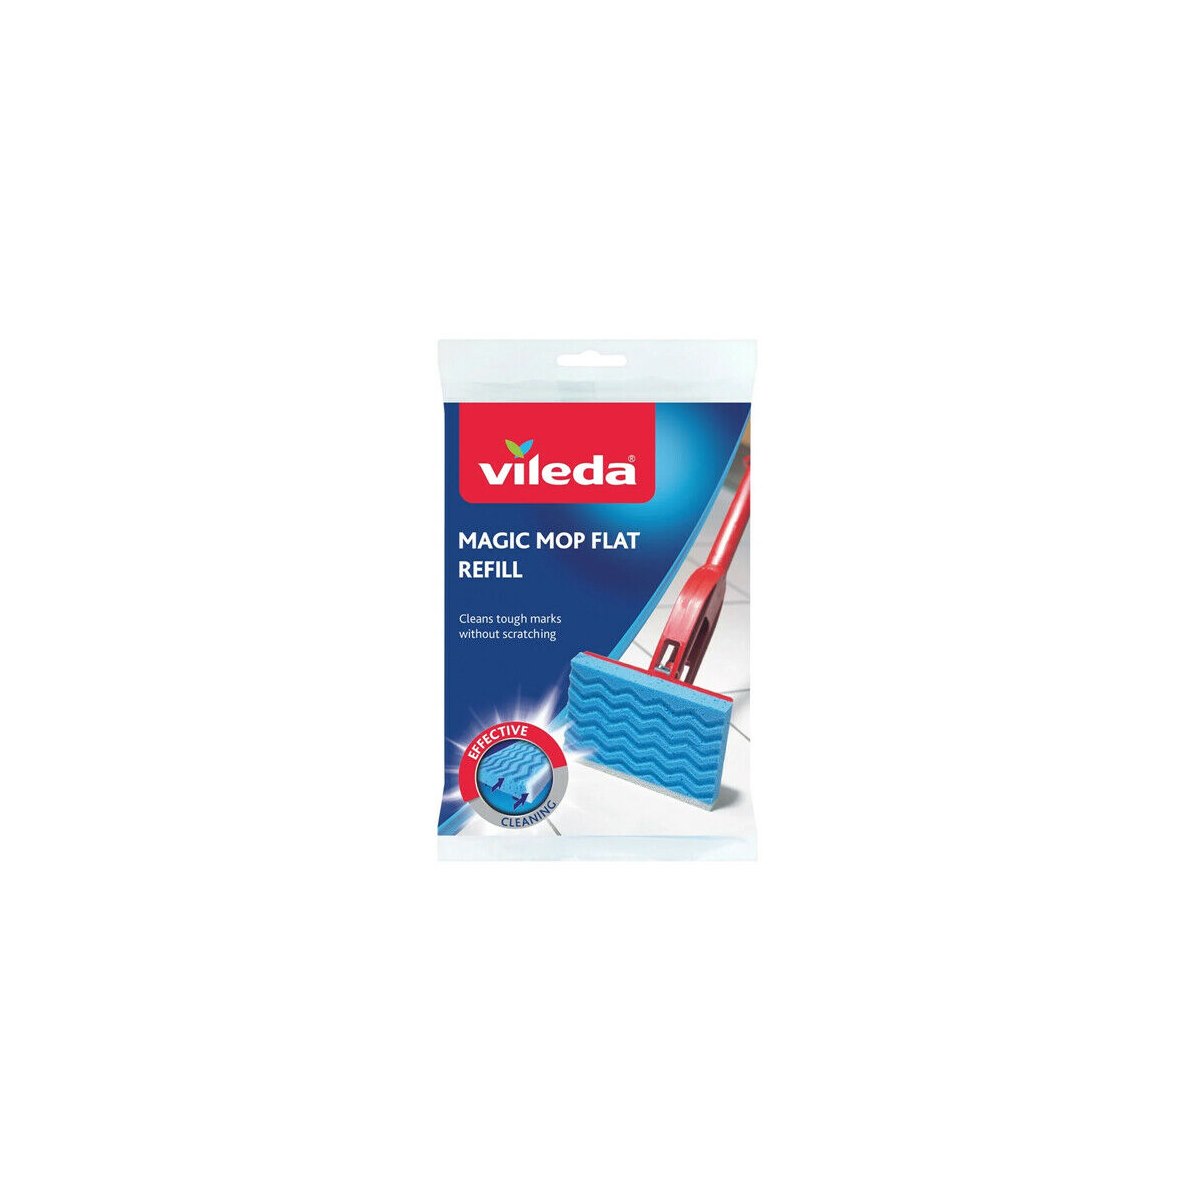 Vileda Vileda Magic Mop Flat Refill Cleans Tough Marks Without Scratching Easy To Fit 